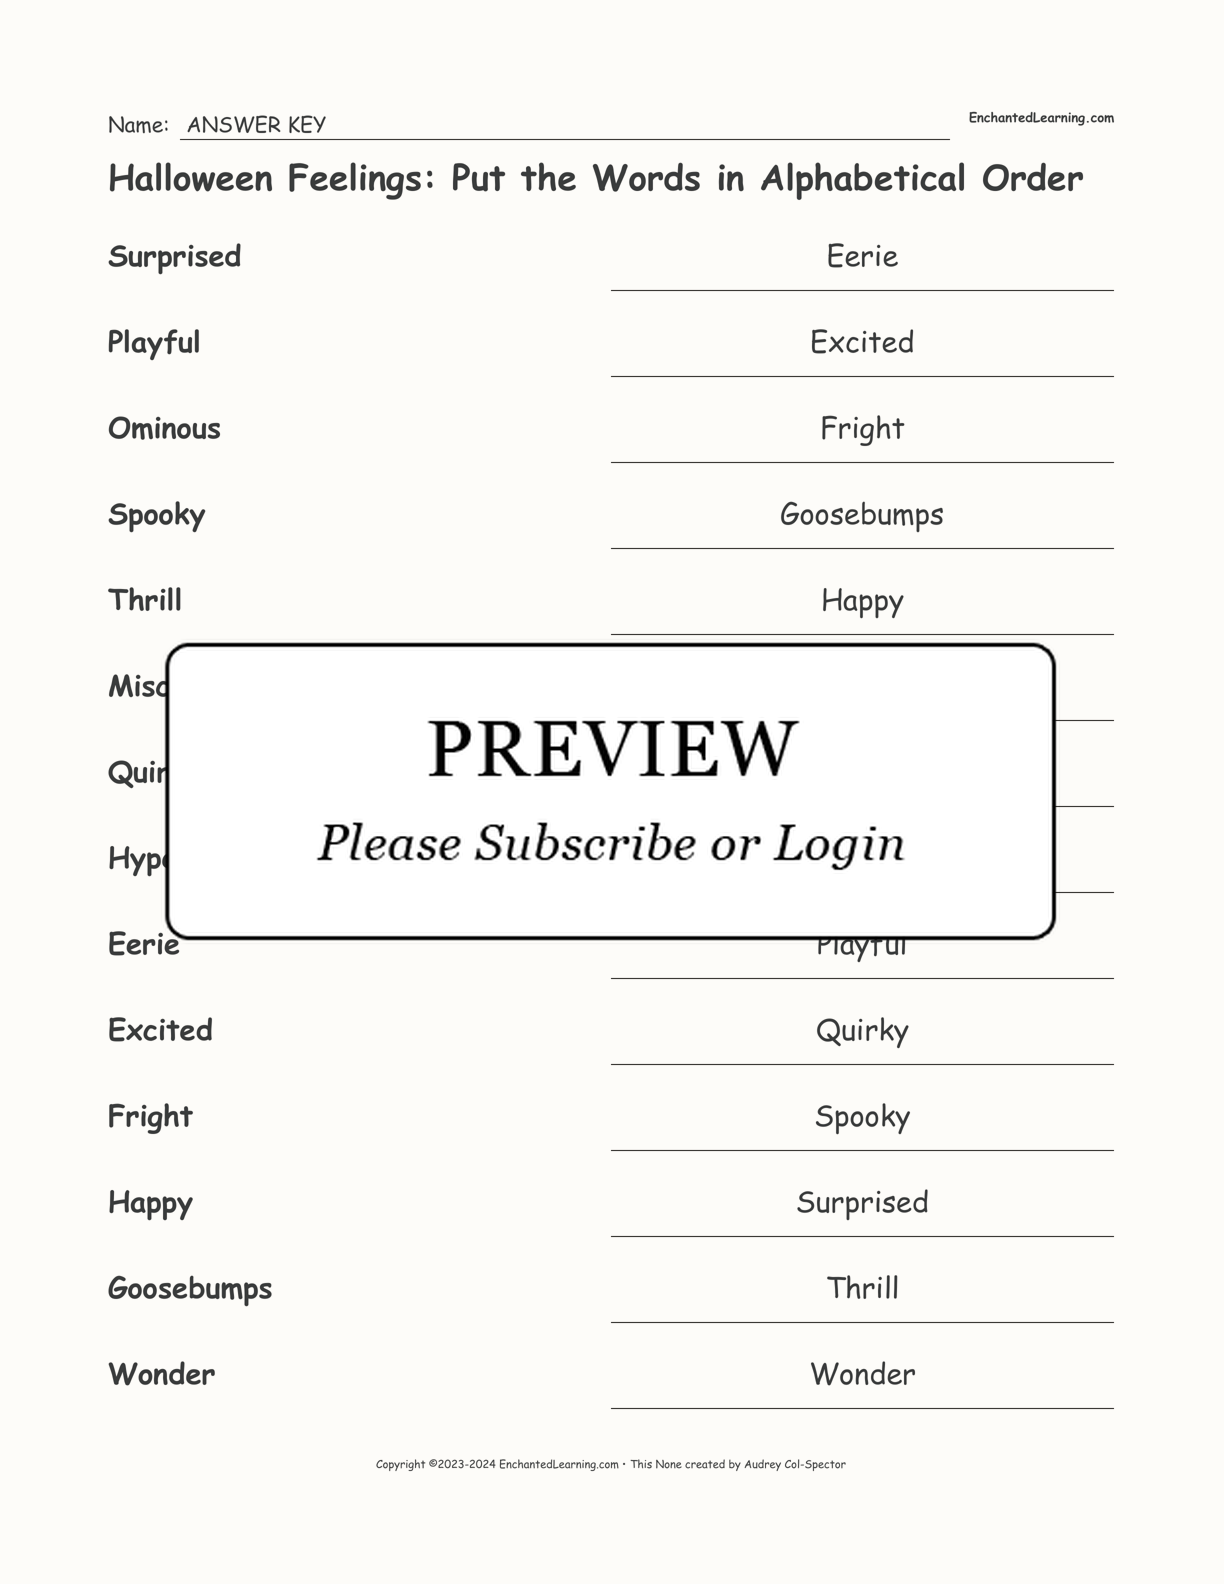 Halloween Feelings: Put the Words in Alphabetical Order interactive worksheet page 2